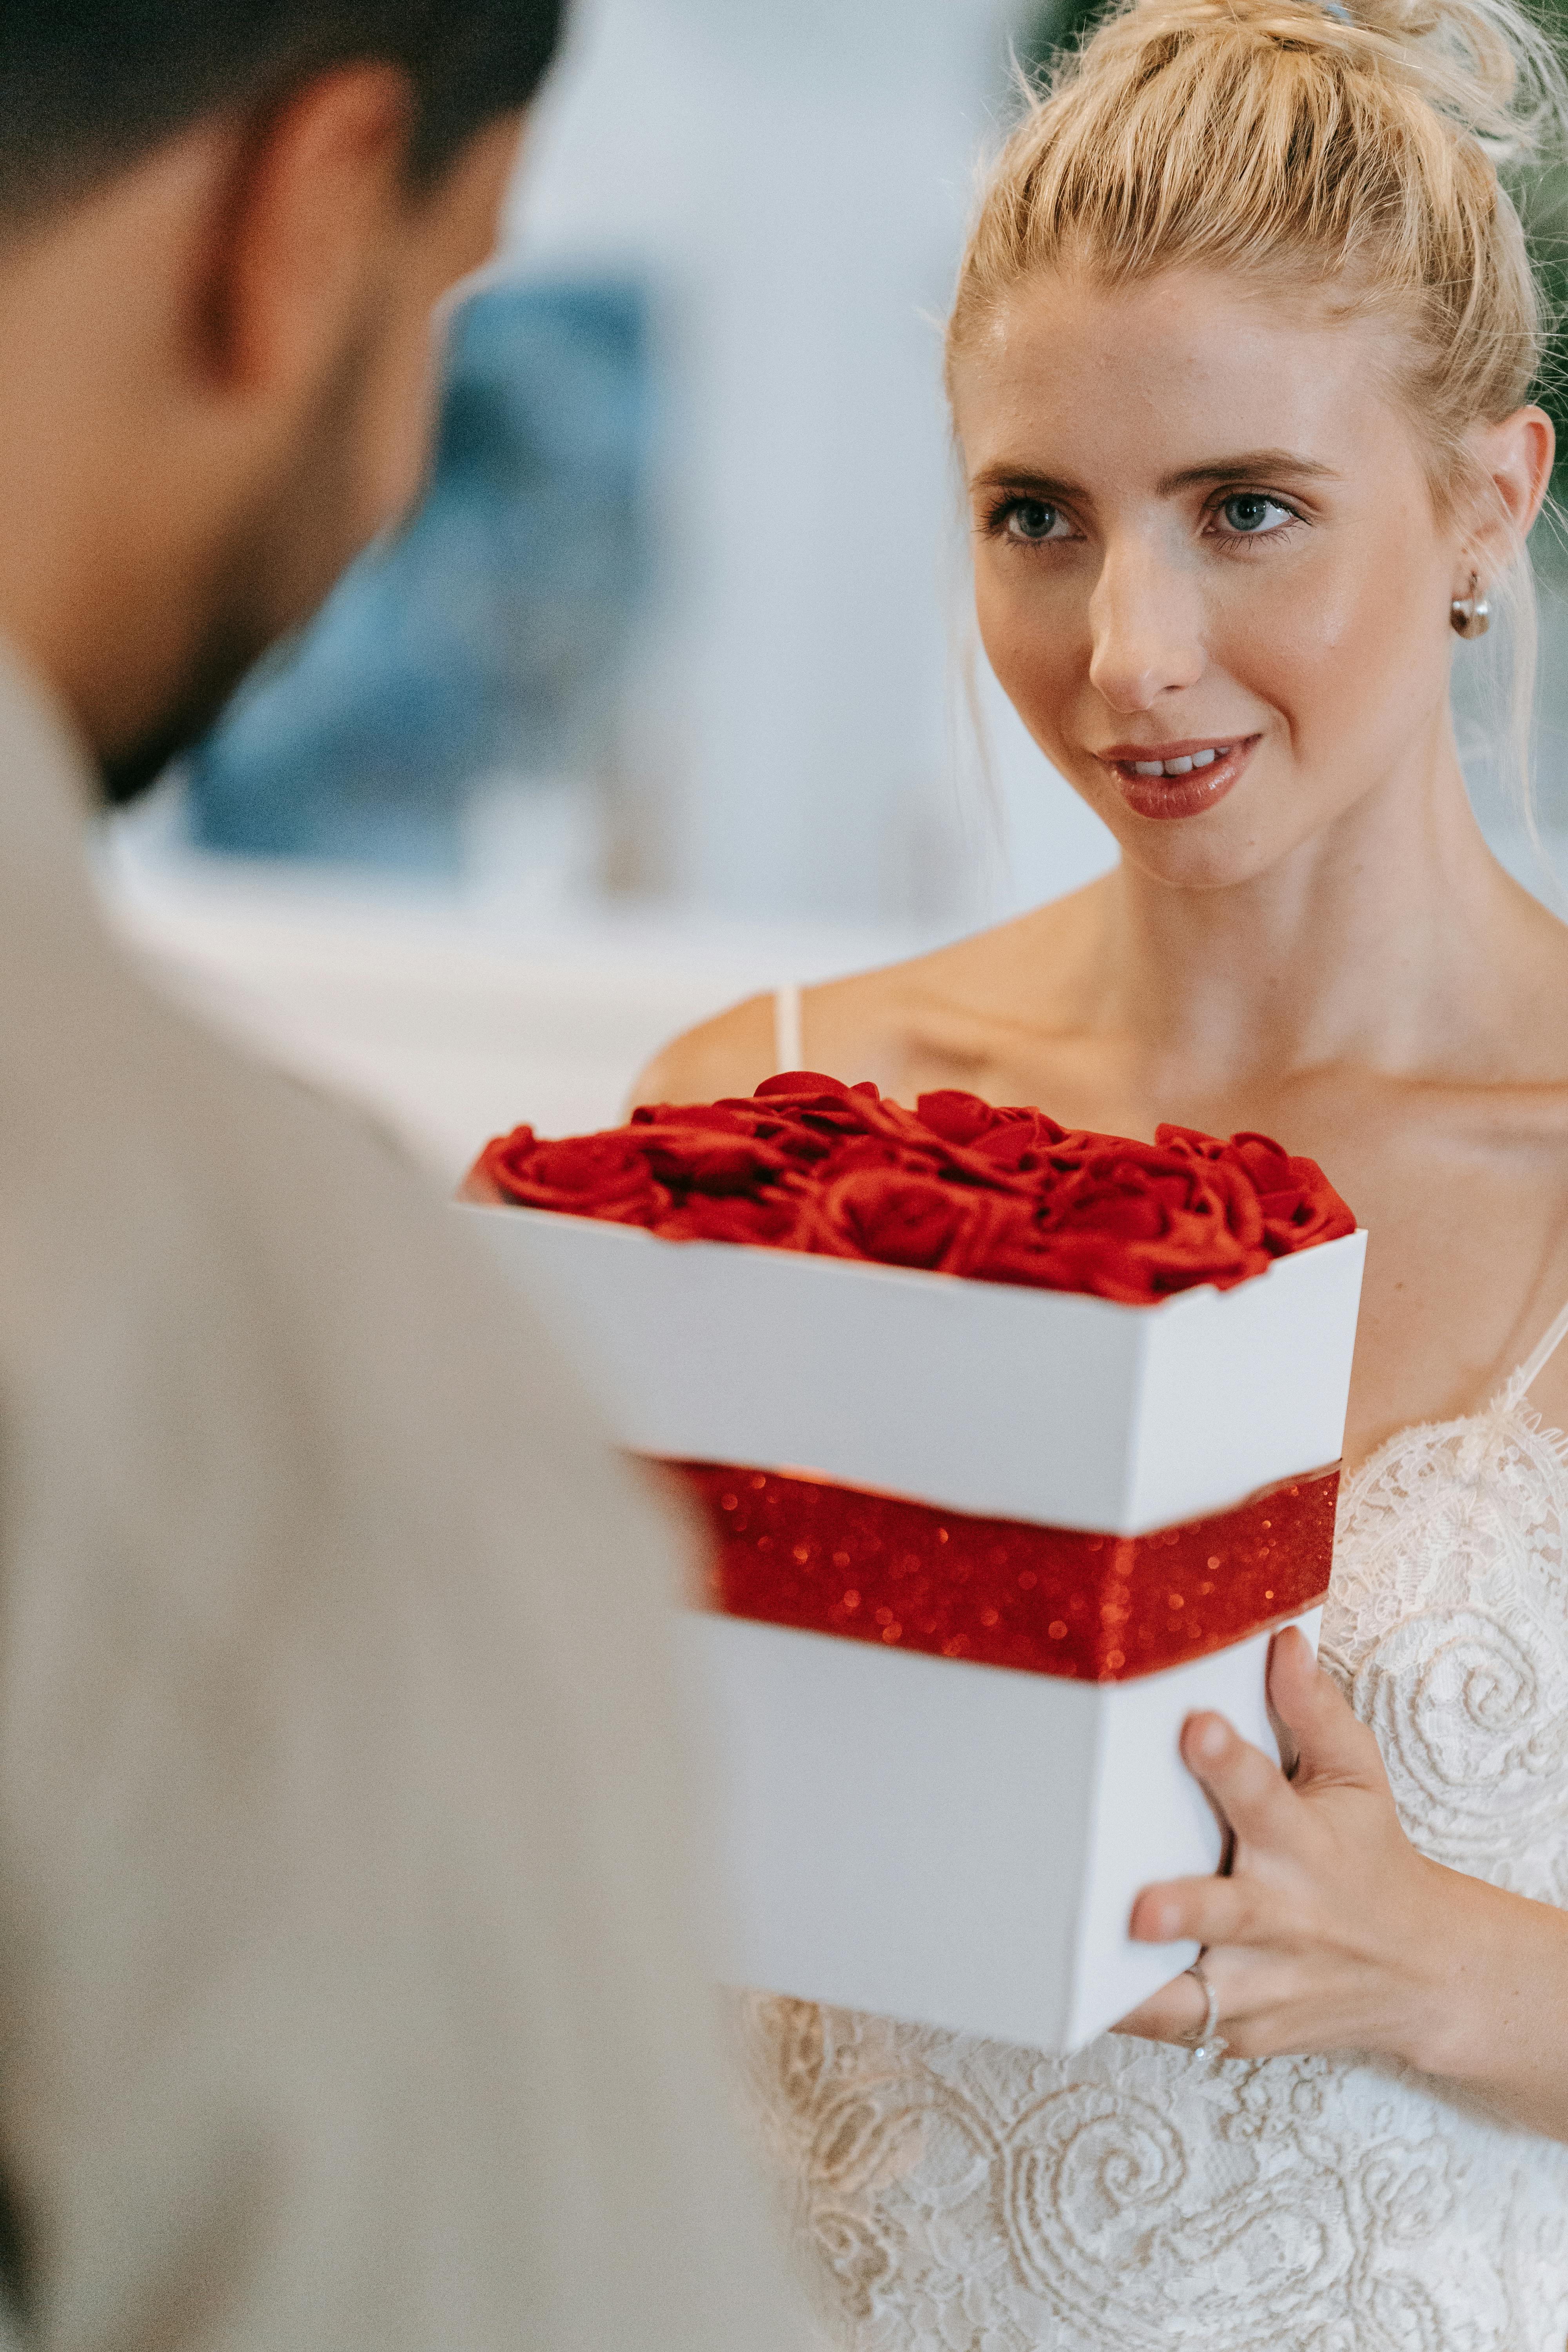 A sincere-looking woman giving a man a gift | Source: Pexels